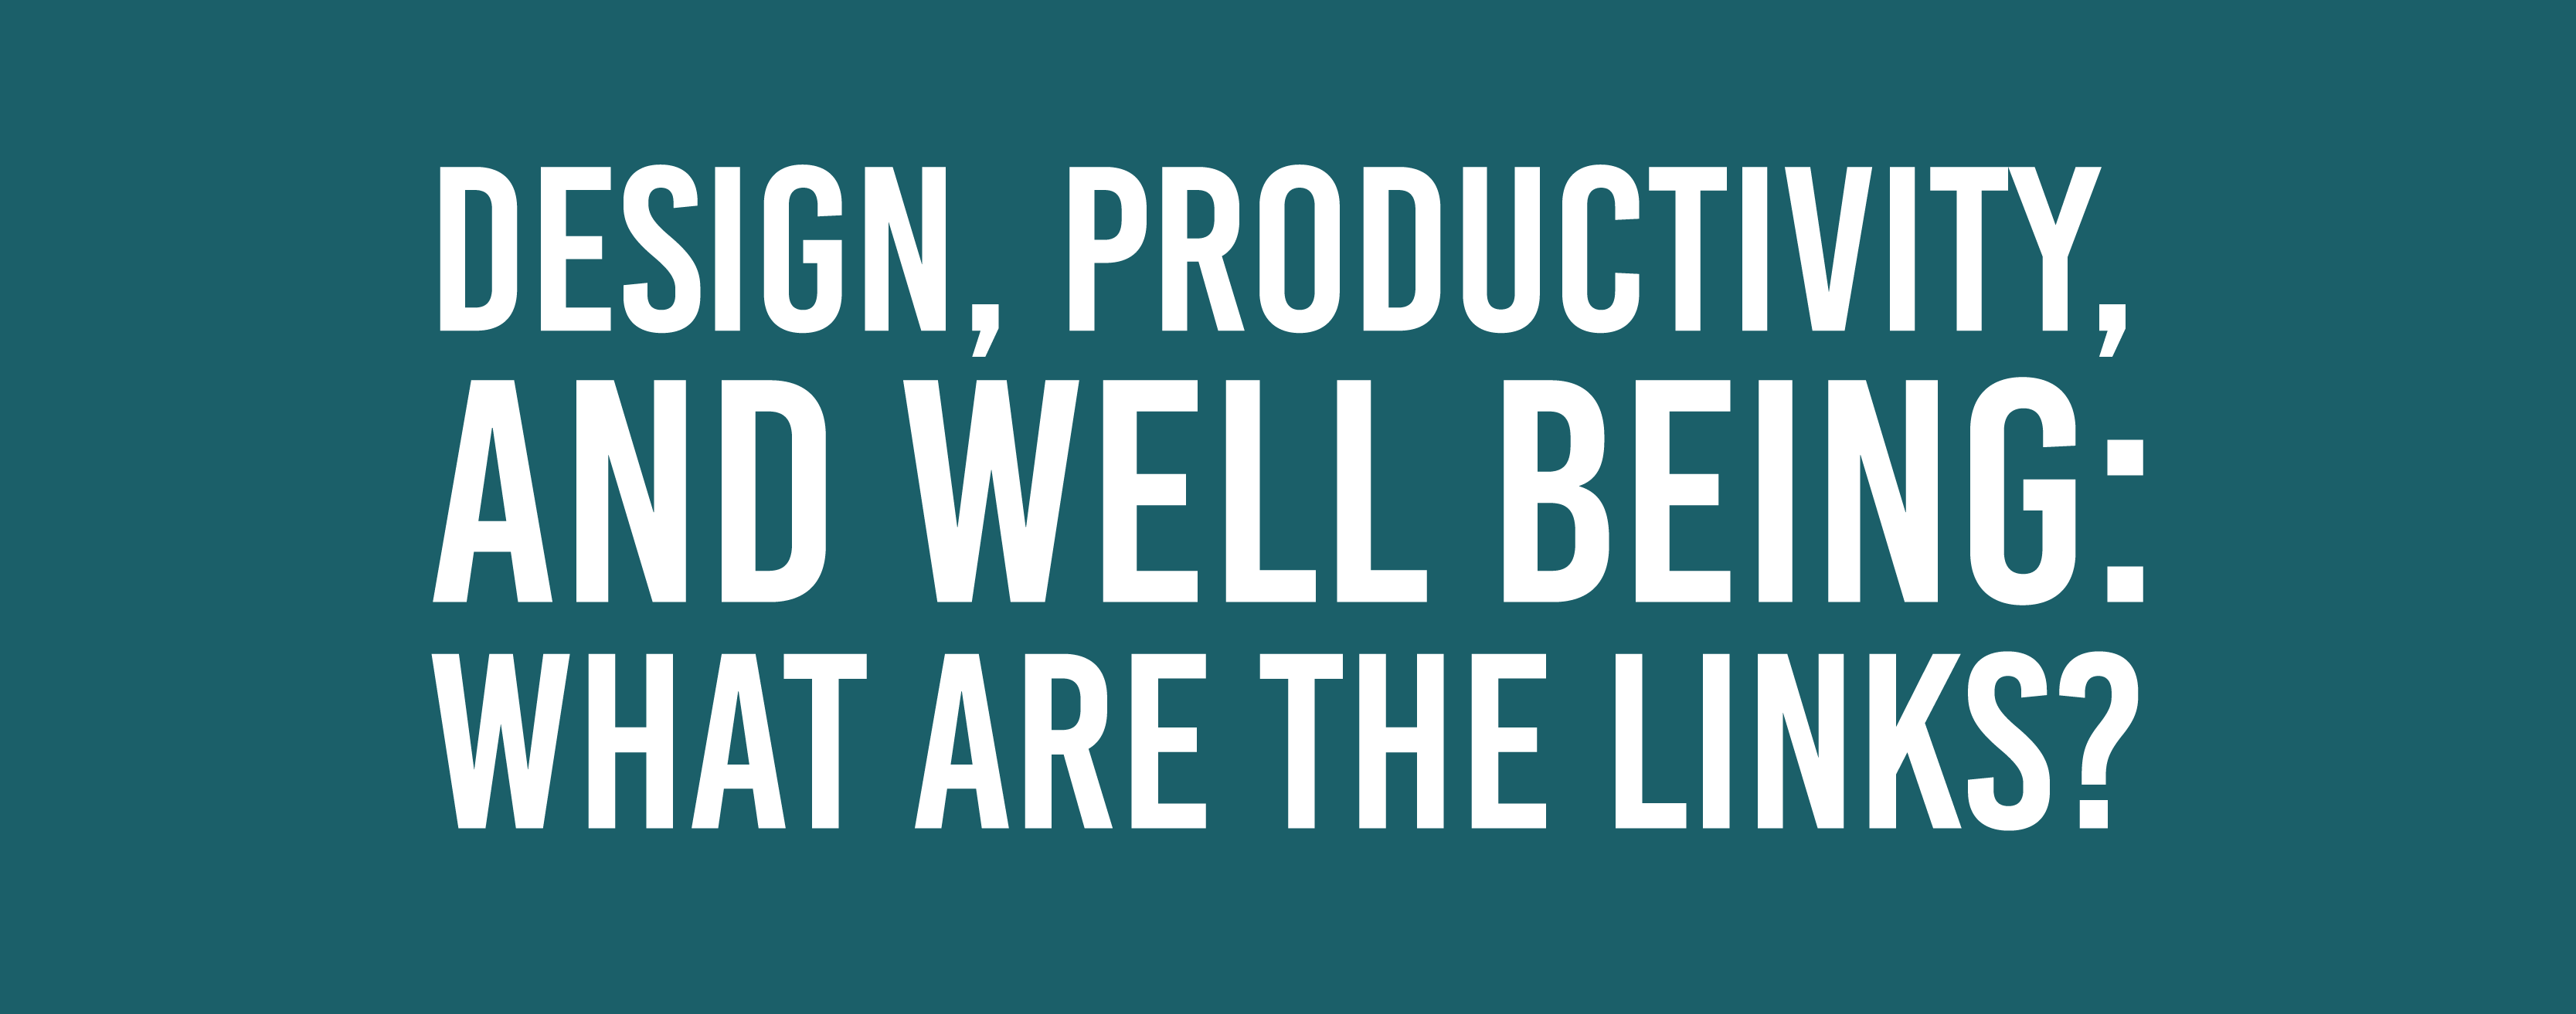 Design, productivity, well being